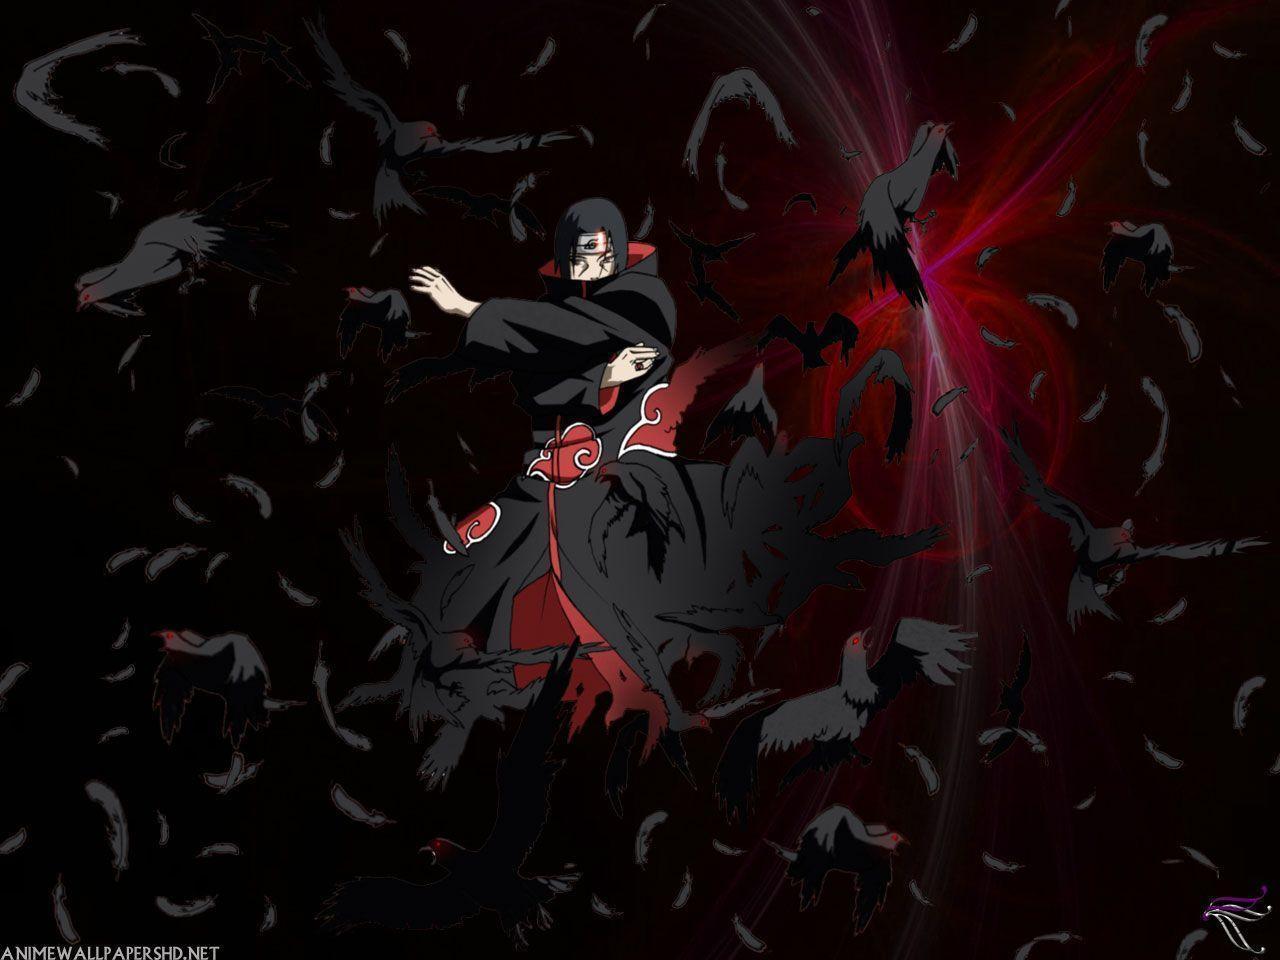 Itachi Uchiha bio by lathdes101 by lathdes101. Publish with Glogster!